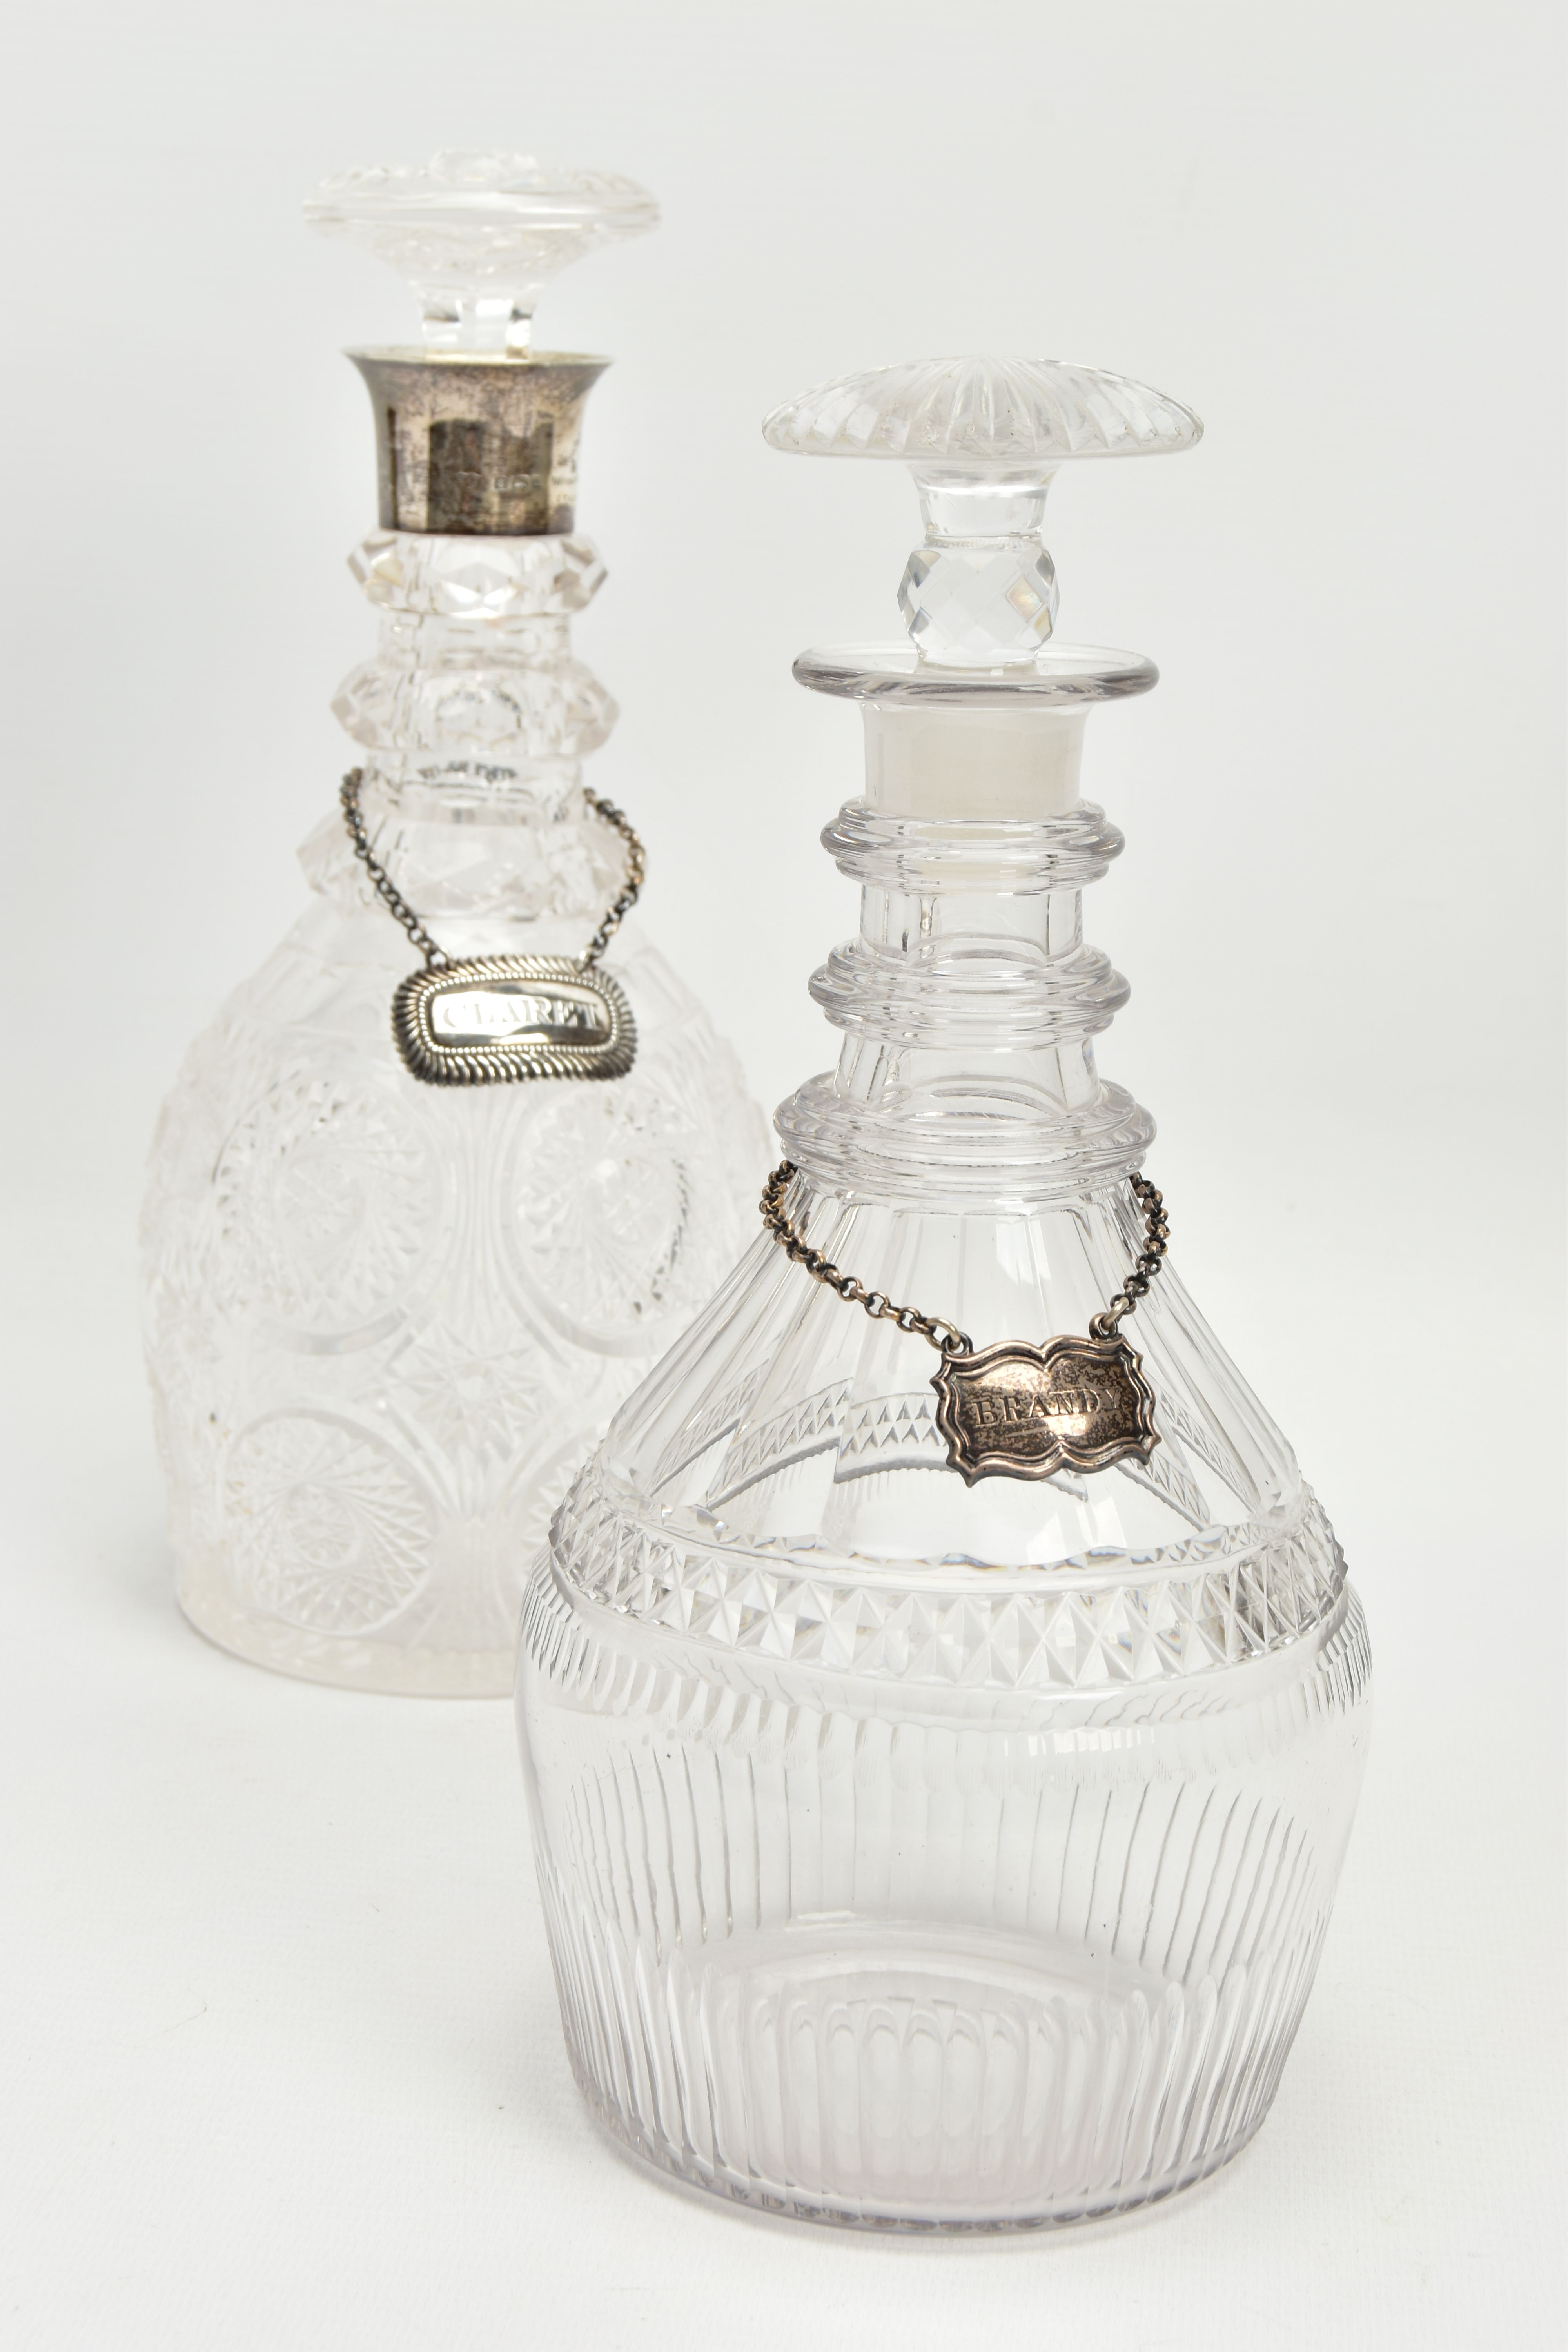 AN EARLY 19TH CENTURY PRUSSIAN SHAPED GLASS DECANTER AND A GEORGE V GLASS DECANTER, the early 19th - Image 3 of 15